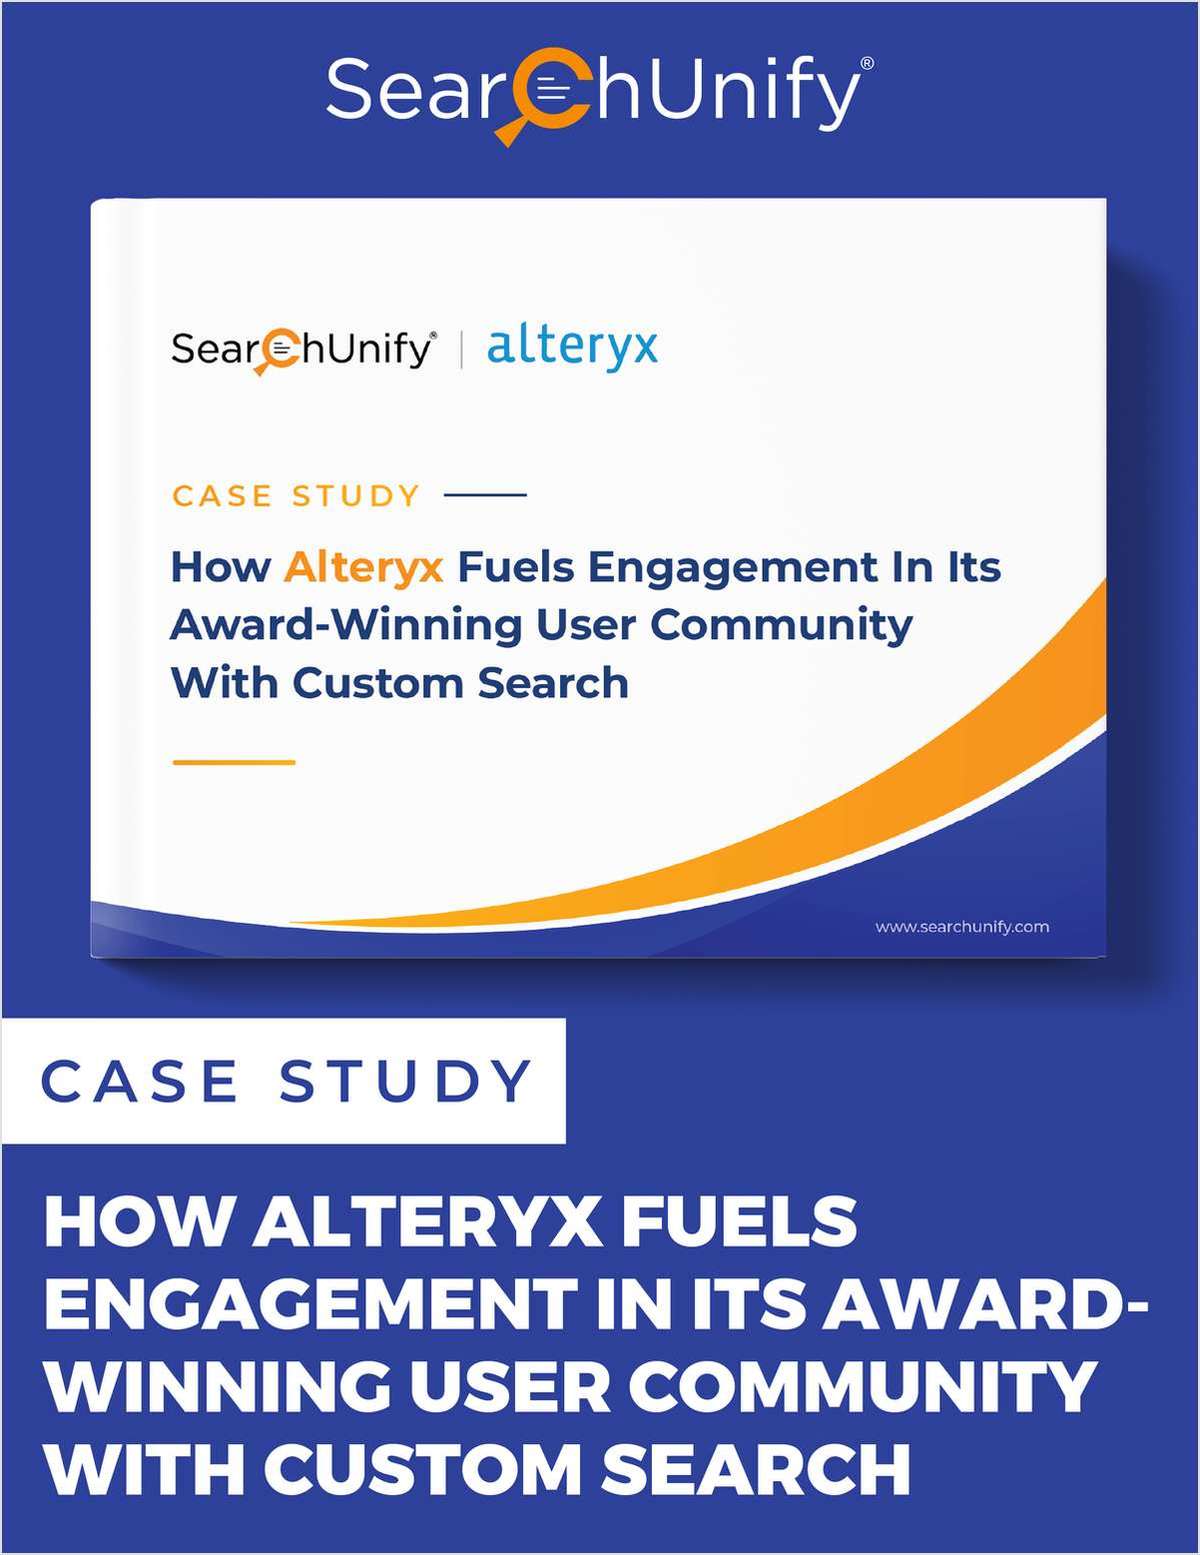 How Alteryx Fuels Engagement in Its Award-Winning User Community with Custom Search